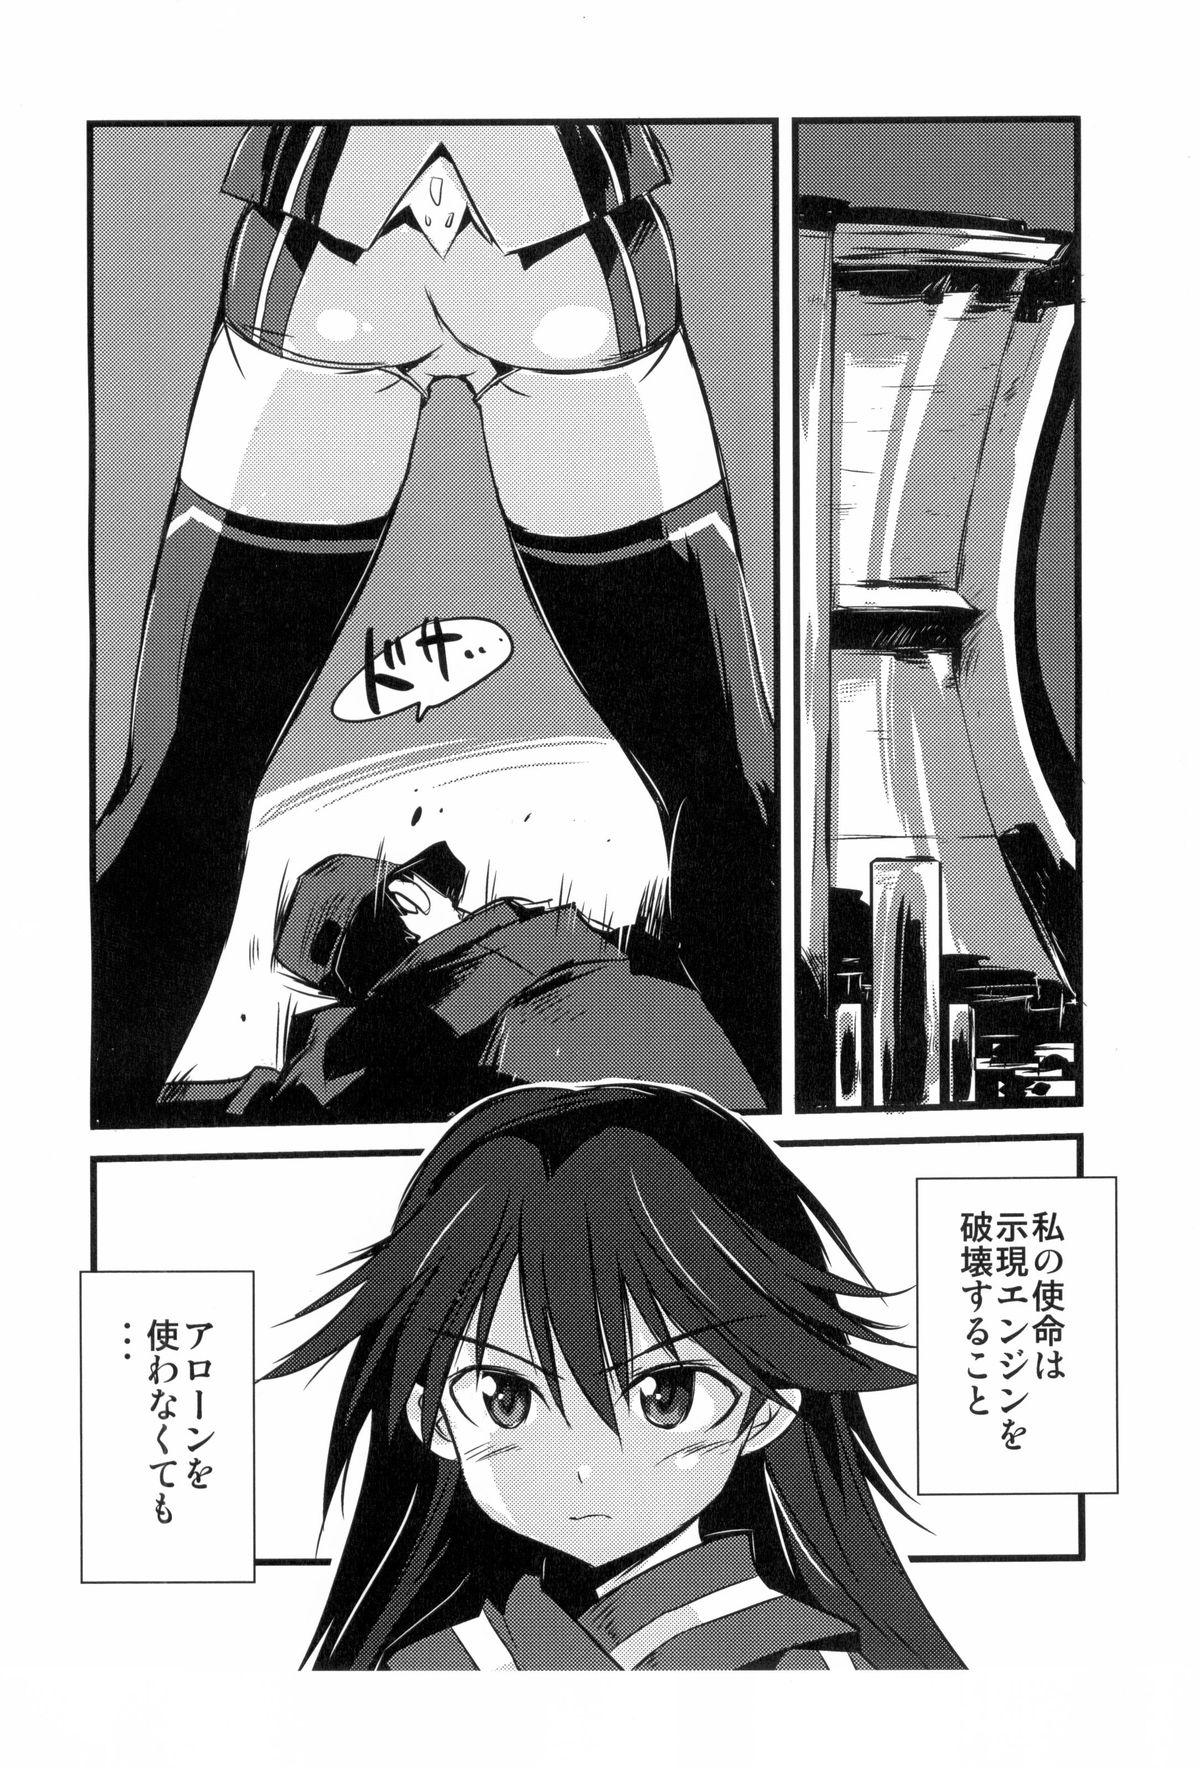 Comedor operation 0 - Vividred operation Bisexual - Page 4